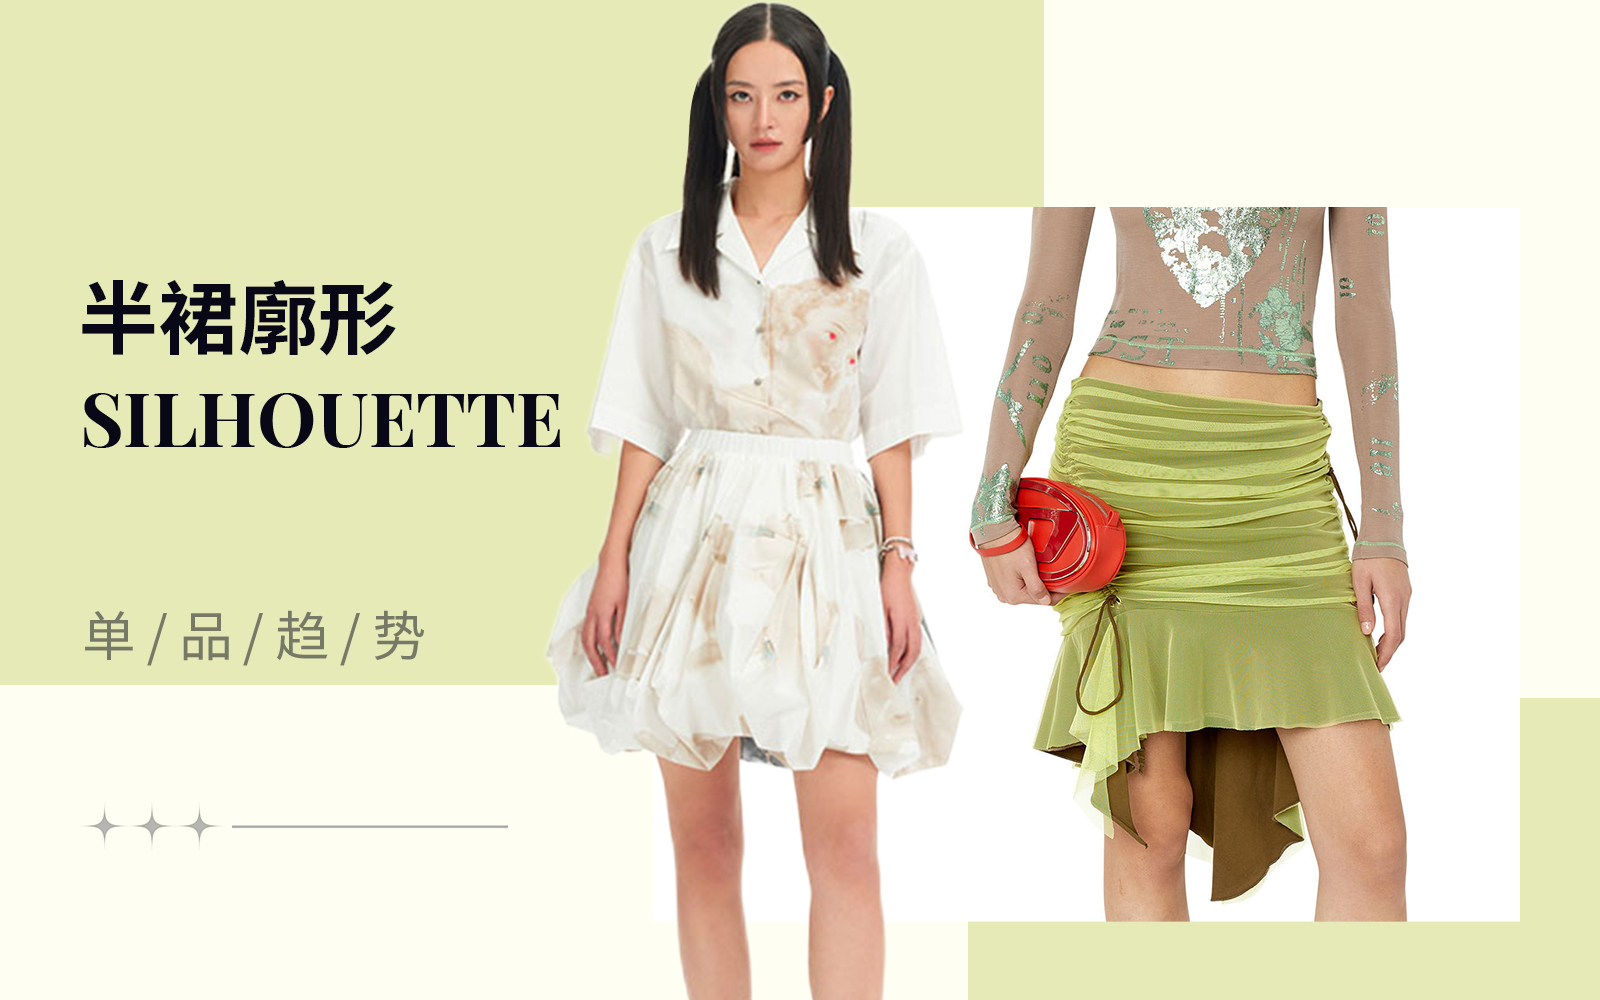 Sweet & Cool -- The Silhouette Trend for Women's Skirt